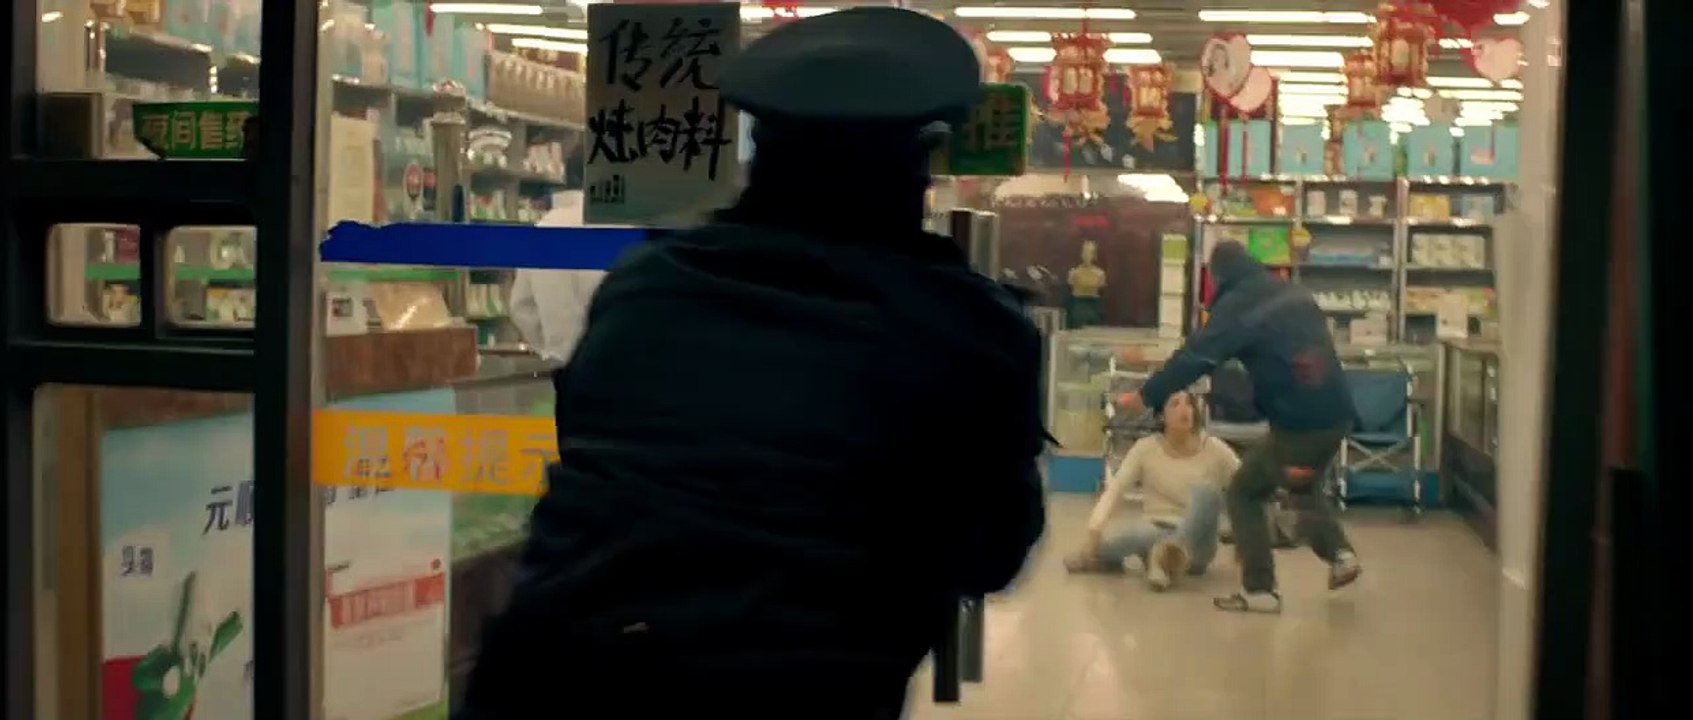 Police Story - Back for Law Trailer DF